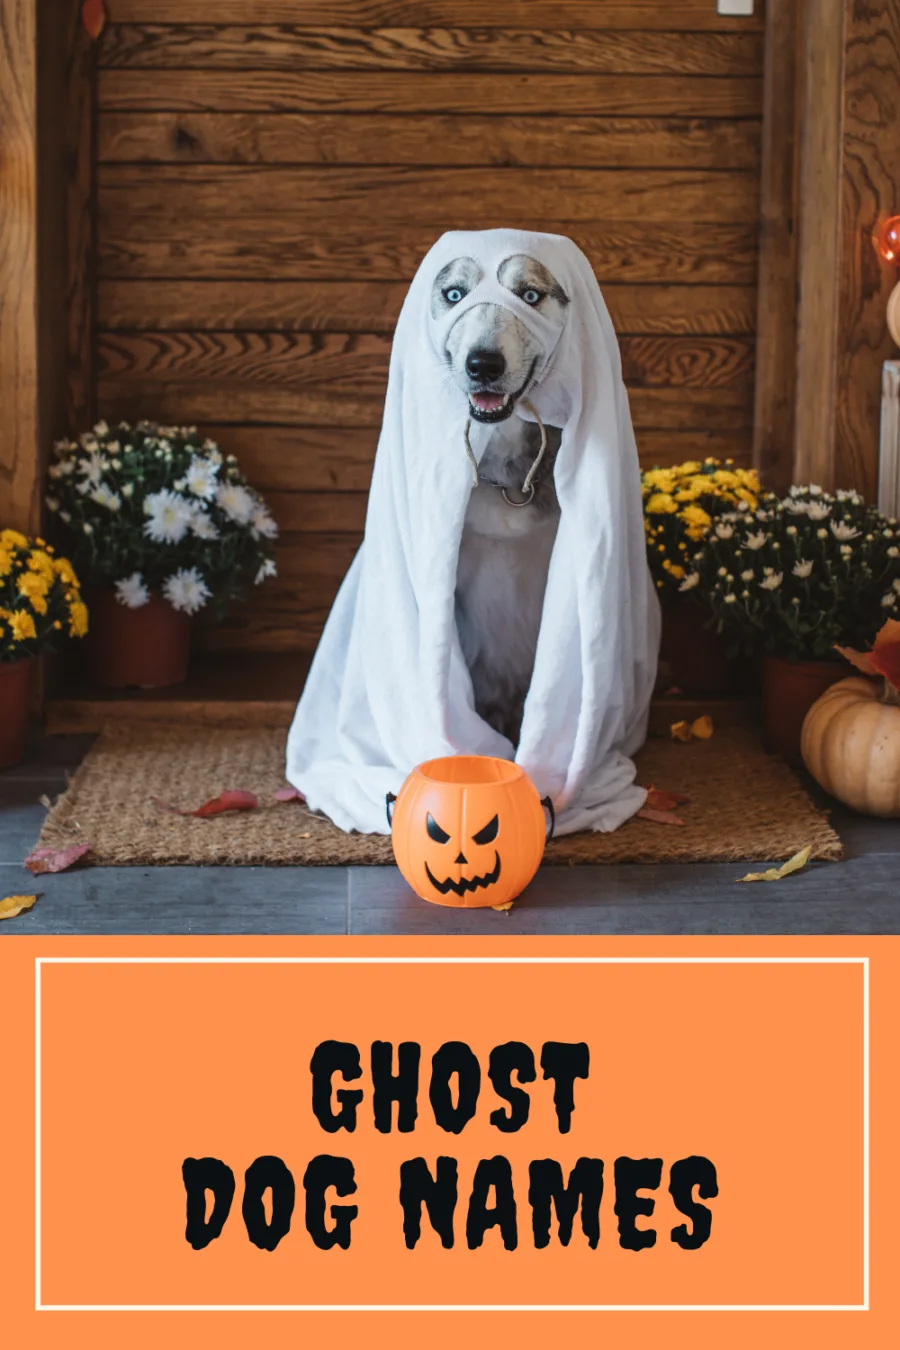 Ghost dog names -- great names for white dogs